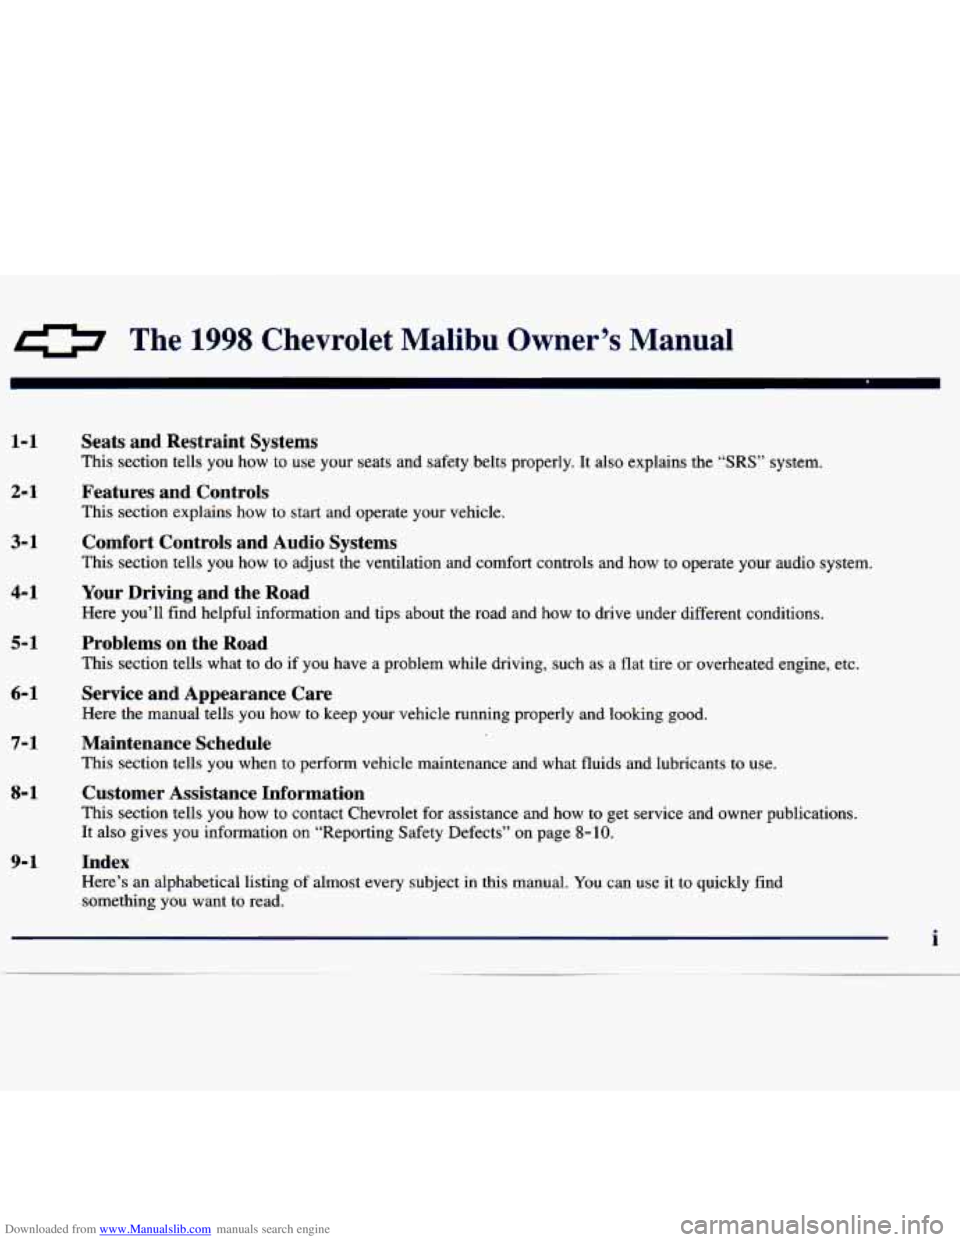 CHEVROLET MALIBU 1998  Owners Manual Downloaded from www.Manualslib.com manuals search engine 0 The 1998 Chevrolet  Malibu  Owner’s  Manual 
1-1 
2-1 
3-1 
4- 1 
5- 1 
6- 1 
7- 1 
8- 1 
9-1 
Seats  and  Restraint  Systems 
This  sectio